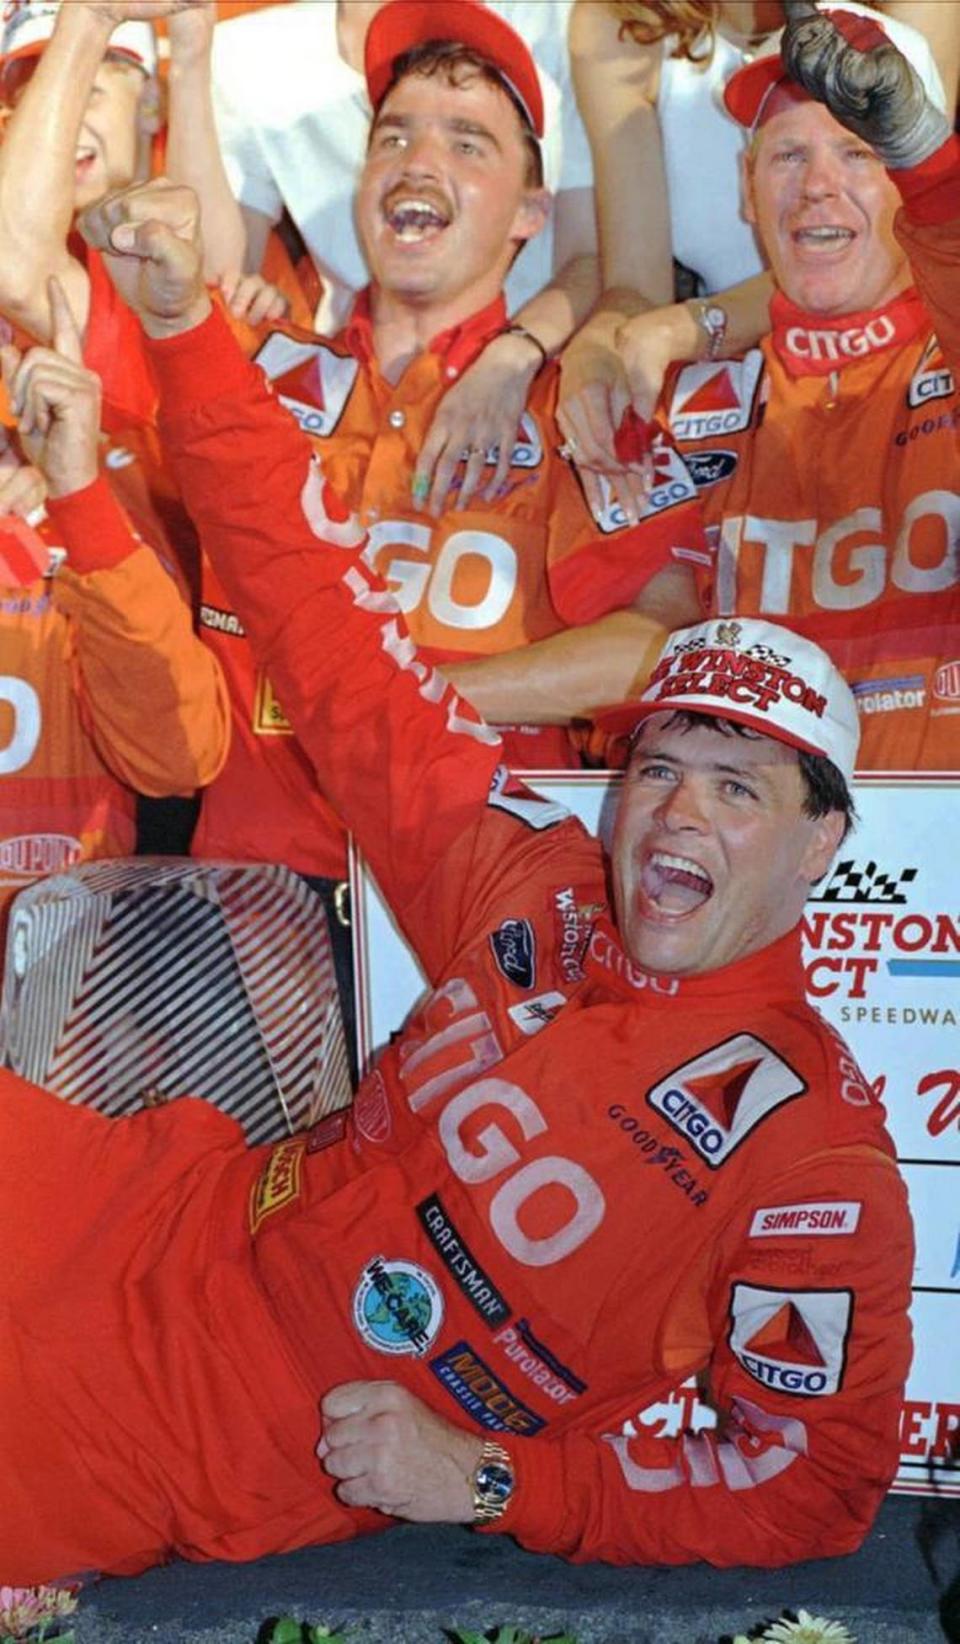 Michael Waltrip celebrates in Victory Lane at Charlotte Motor Speedway after winning the Winston Select all-star race on May 18, 1996.